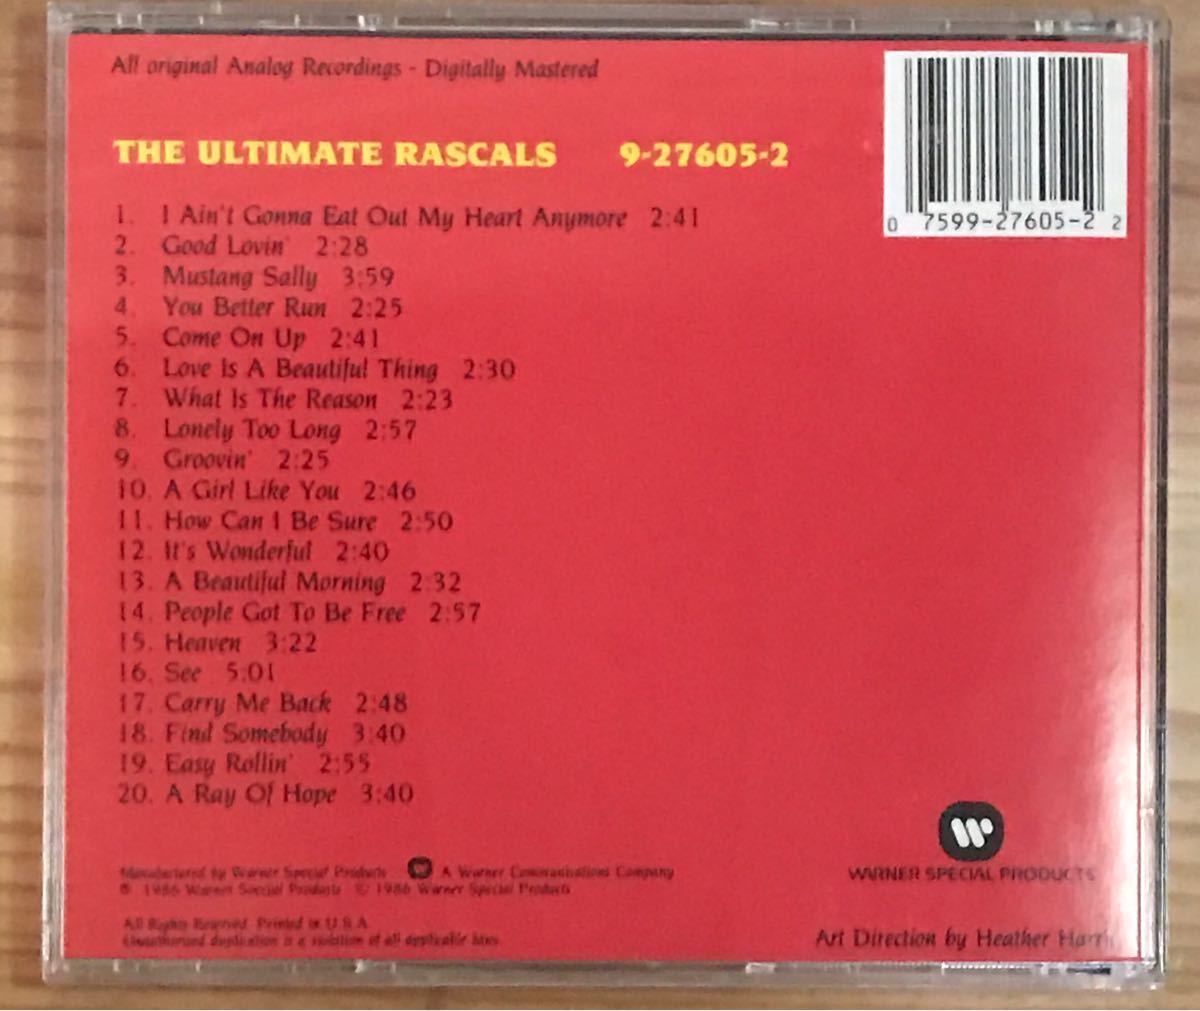 The Rascals / The Ultimate Rascals